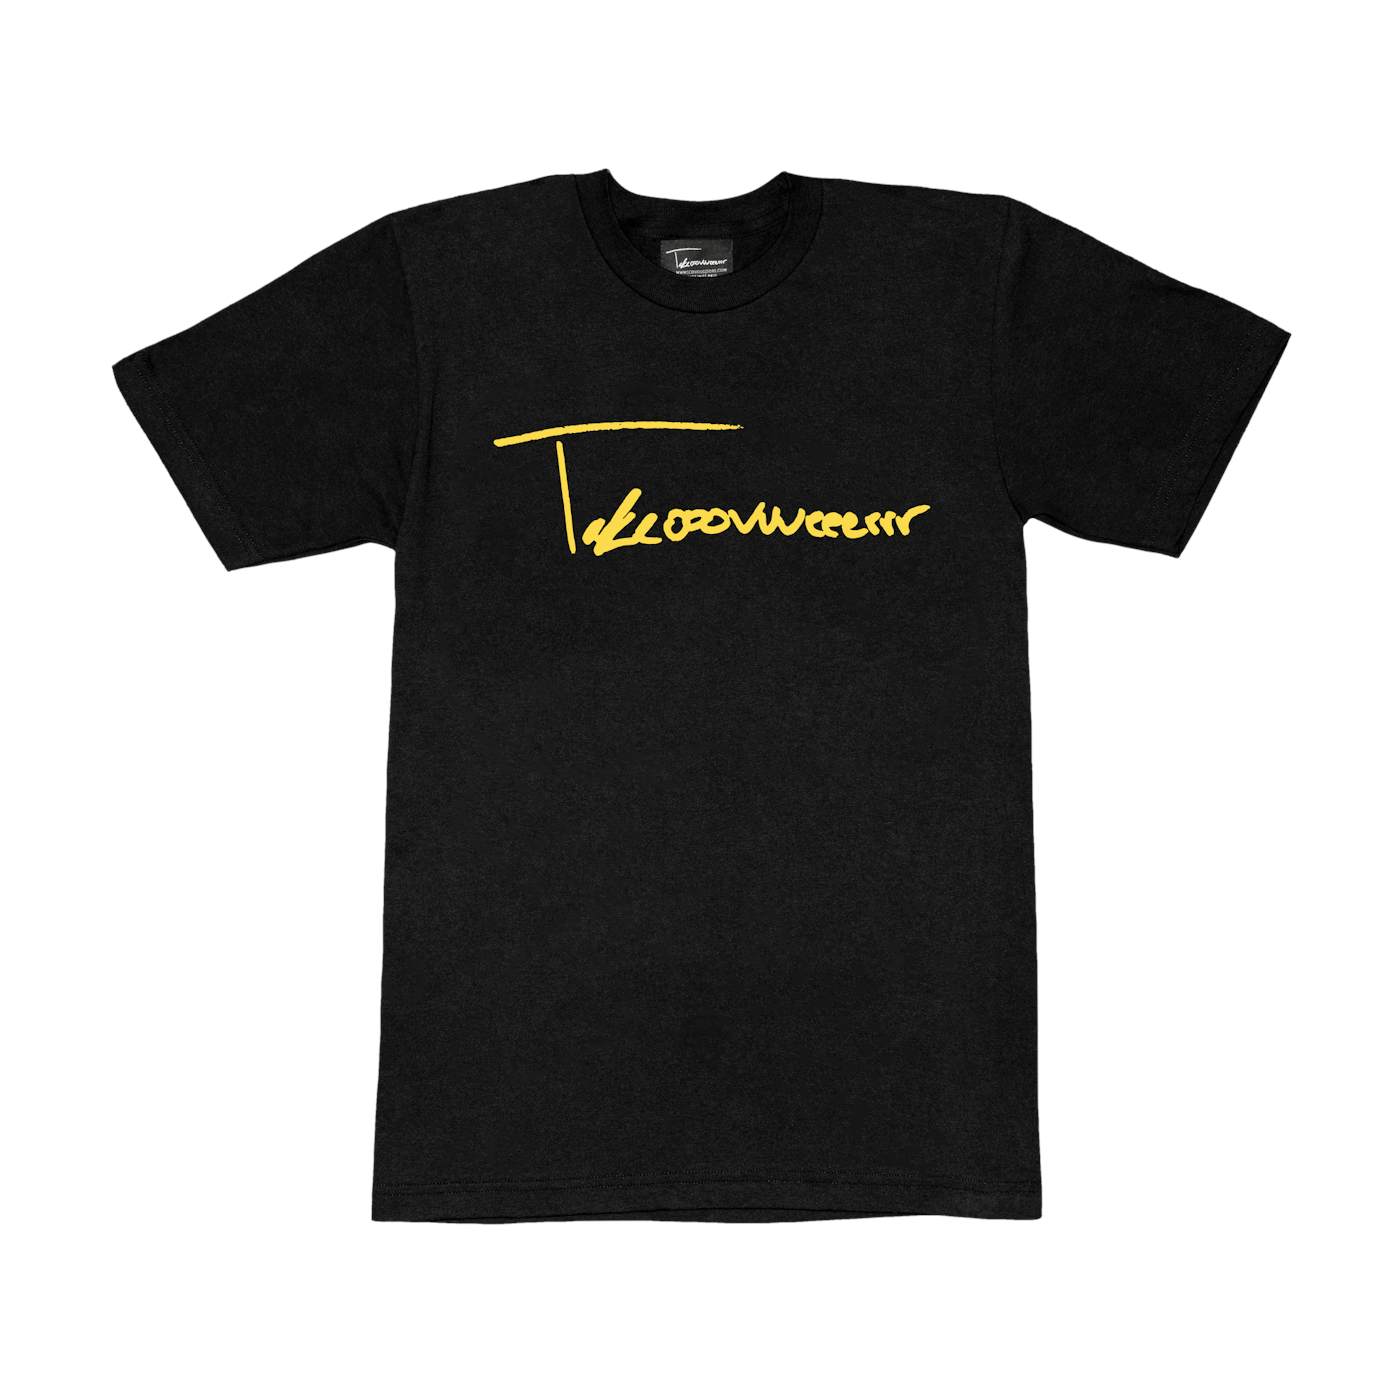 Taylor J Takeover Signature Tee (Black/Yellow)